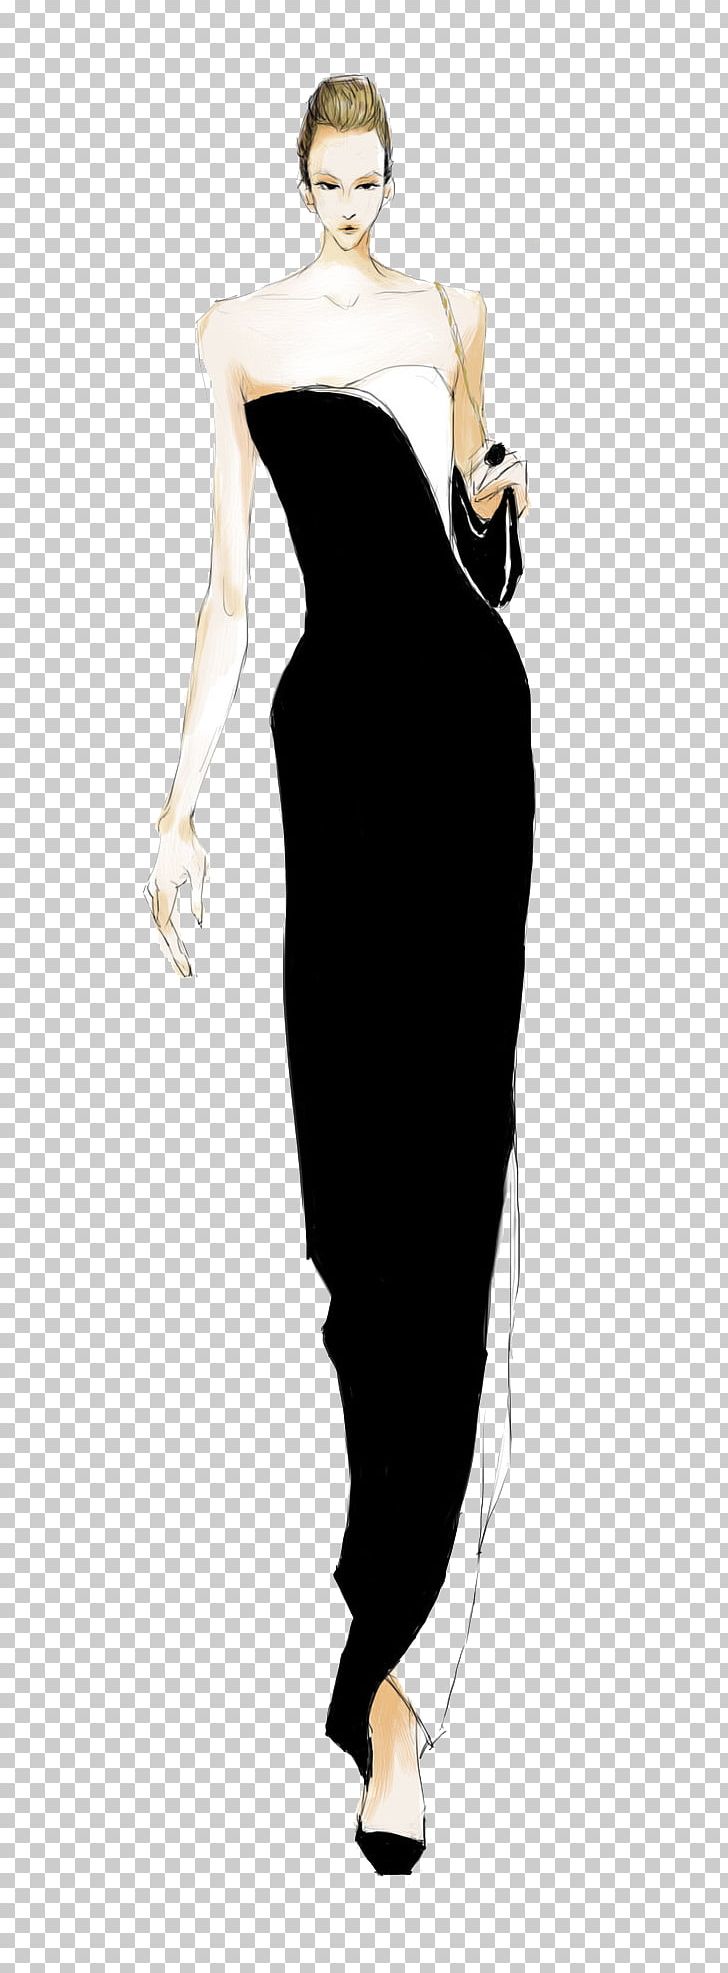 Model Drawing Dress Illustration PNG, Clipart, Clothing, Fashion, Fashion Design, Fashion Illustration, Fashion Model Free PNG Download